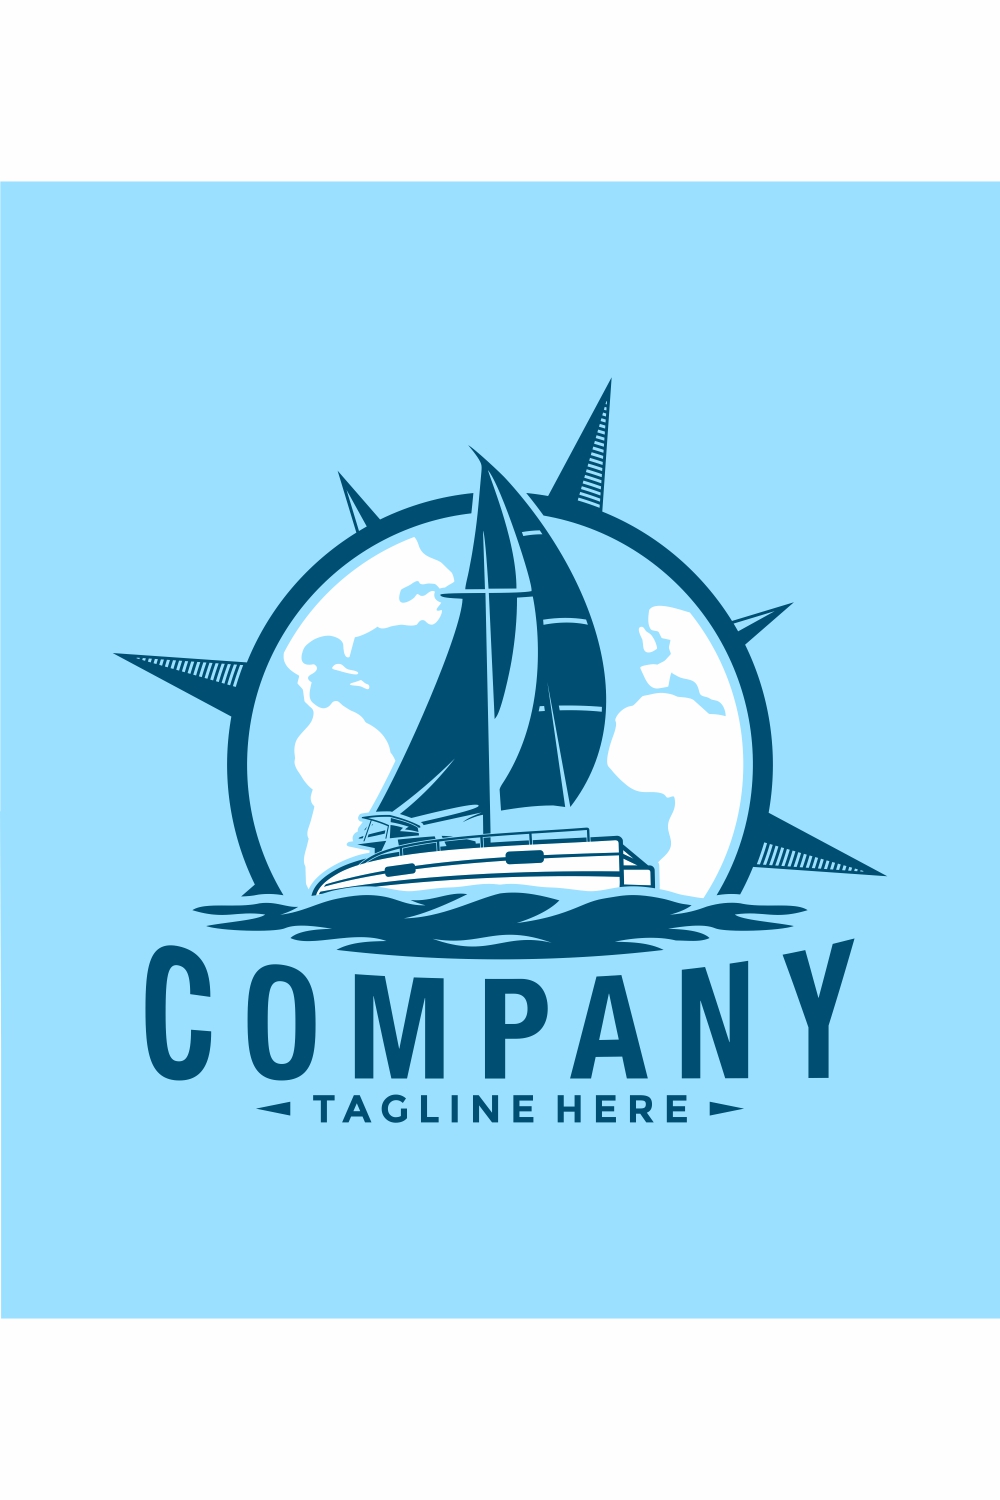 Catamaran, Yacht and Boat Symbol Logo Design with compass background - only 10$ pinterest preview image.